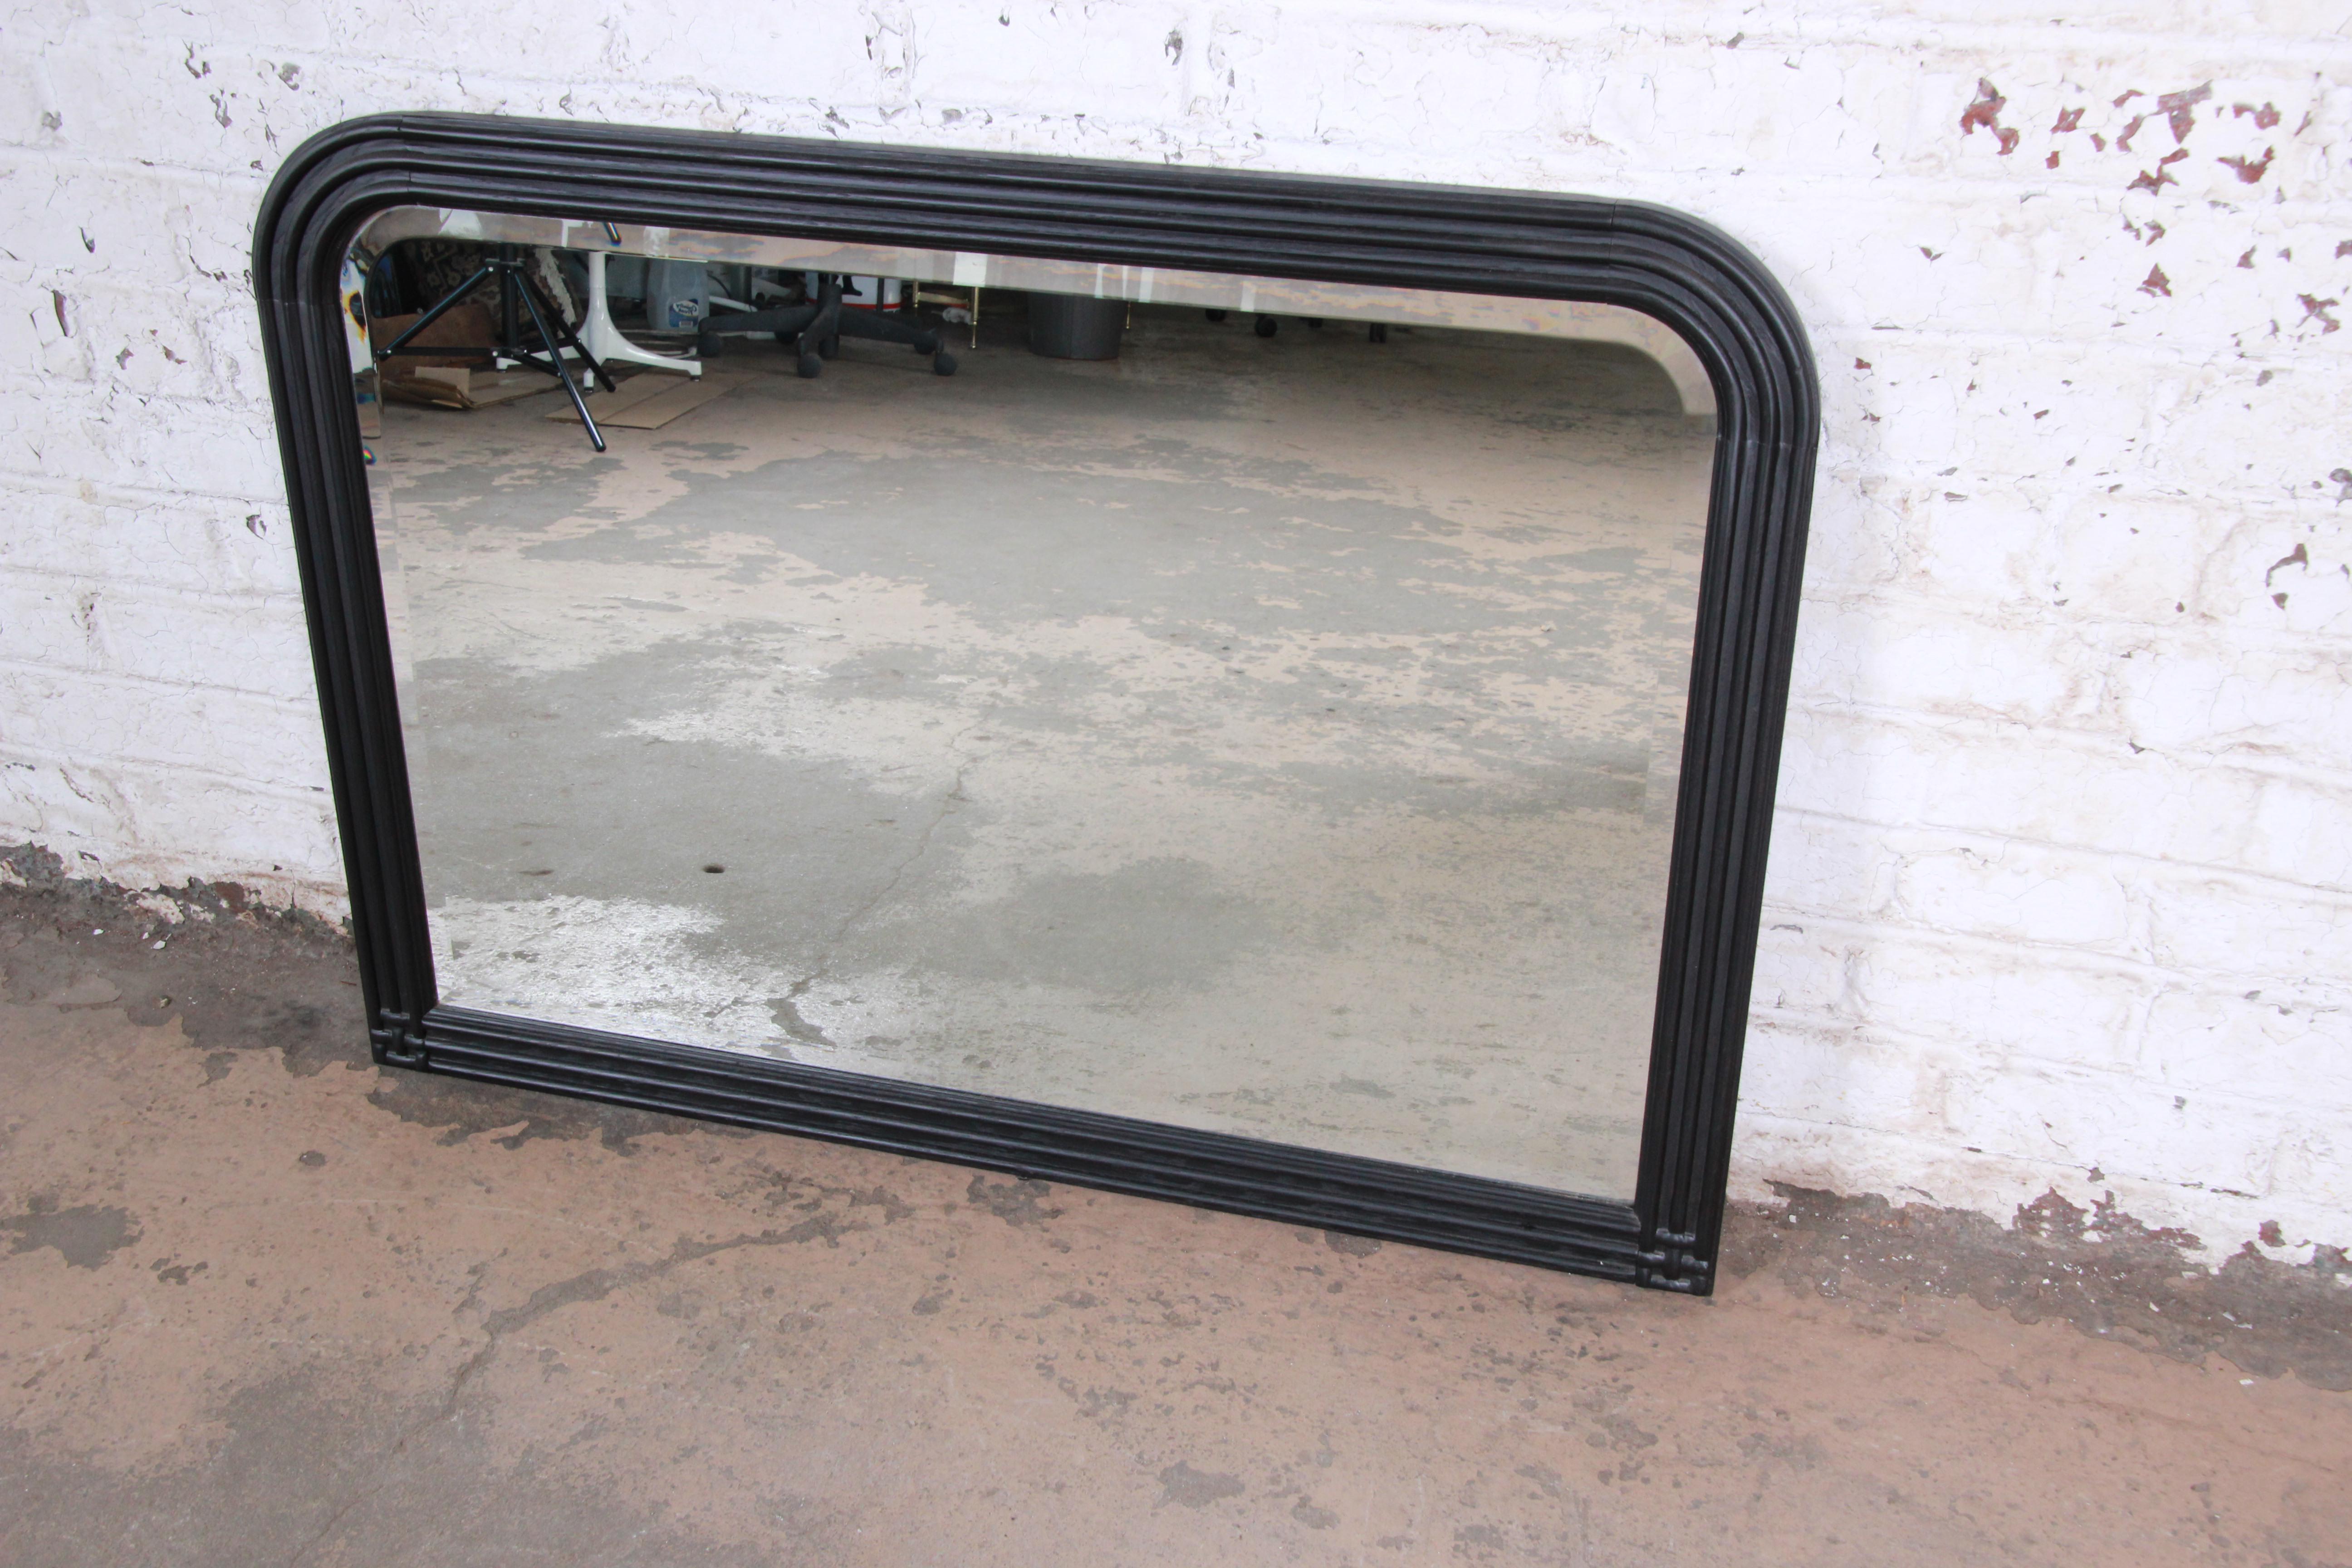 A nice black lacquered oak mirror by Jay Spectre for Century Furniture. The mirror has a nice rounded beveled edge at the top corners. The mirror has newly been refinished and is in excellent condition.